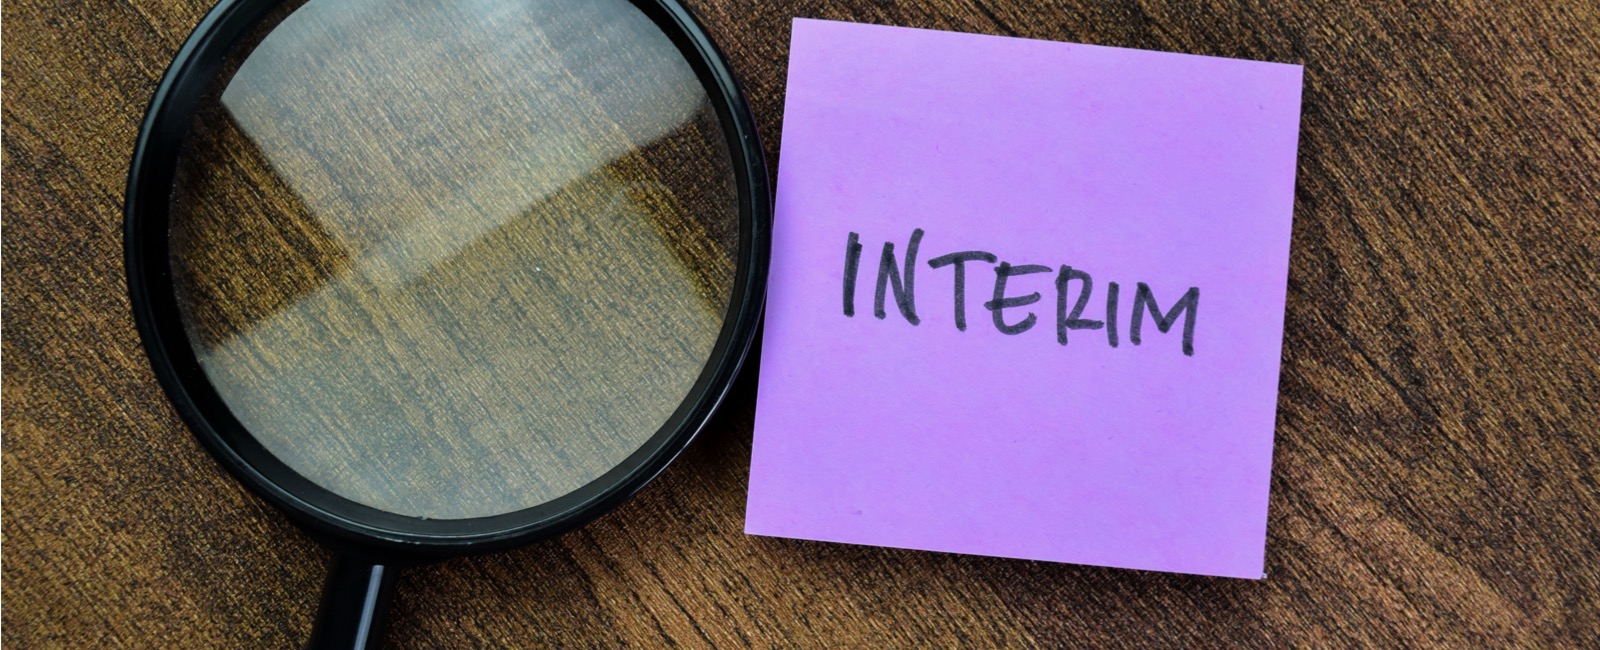 Questions to Ask before Taking an Interim Role